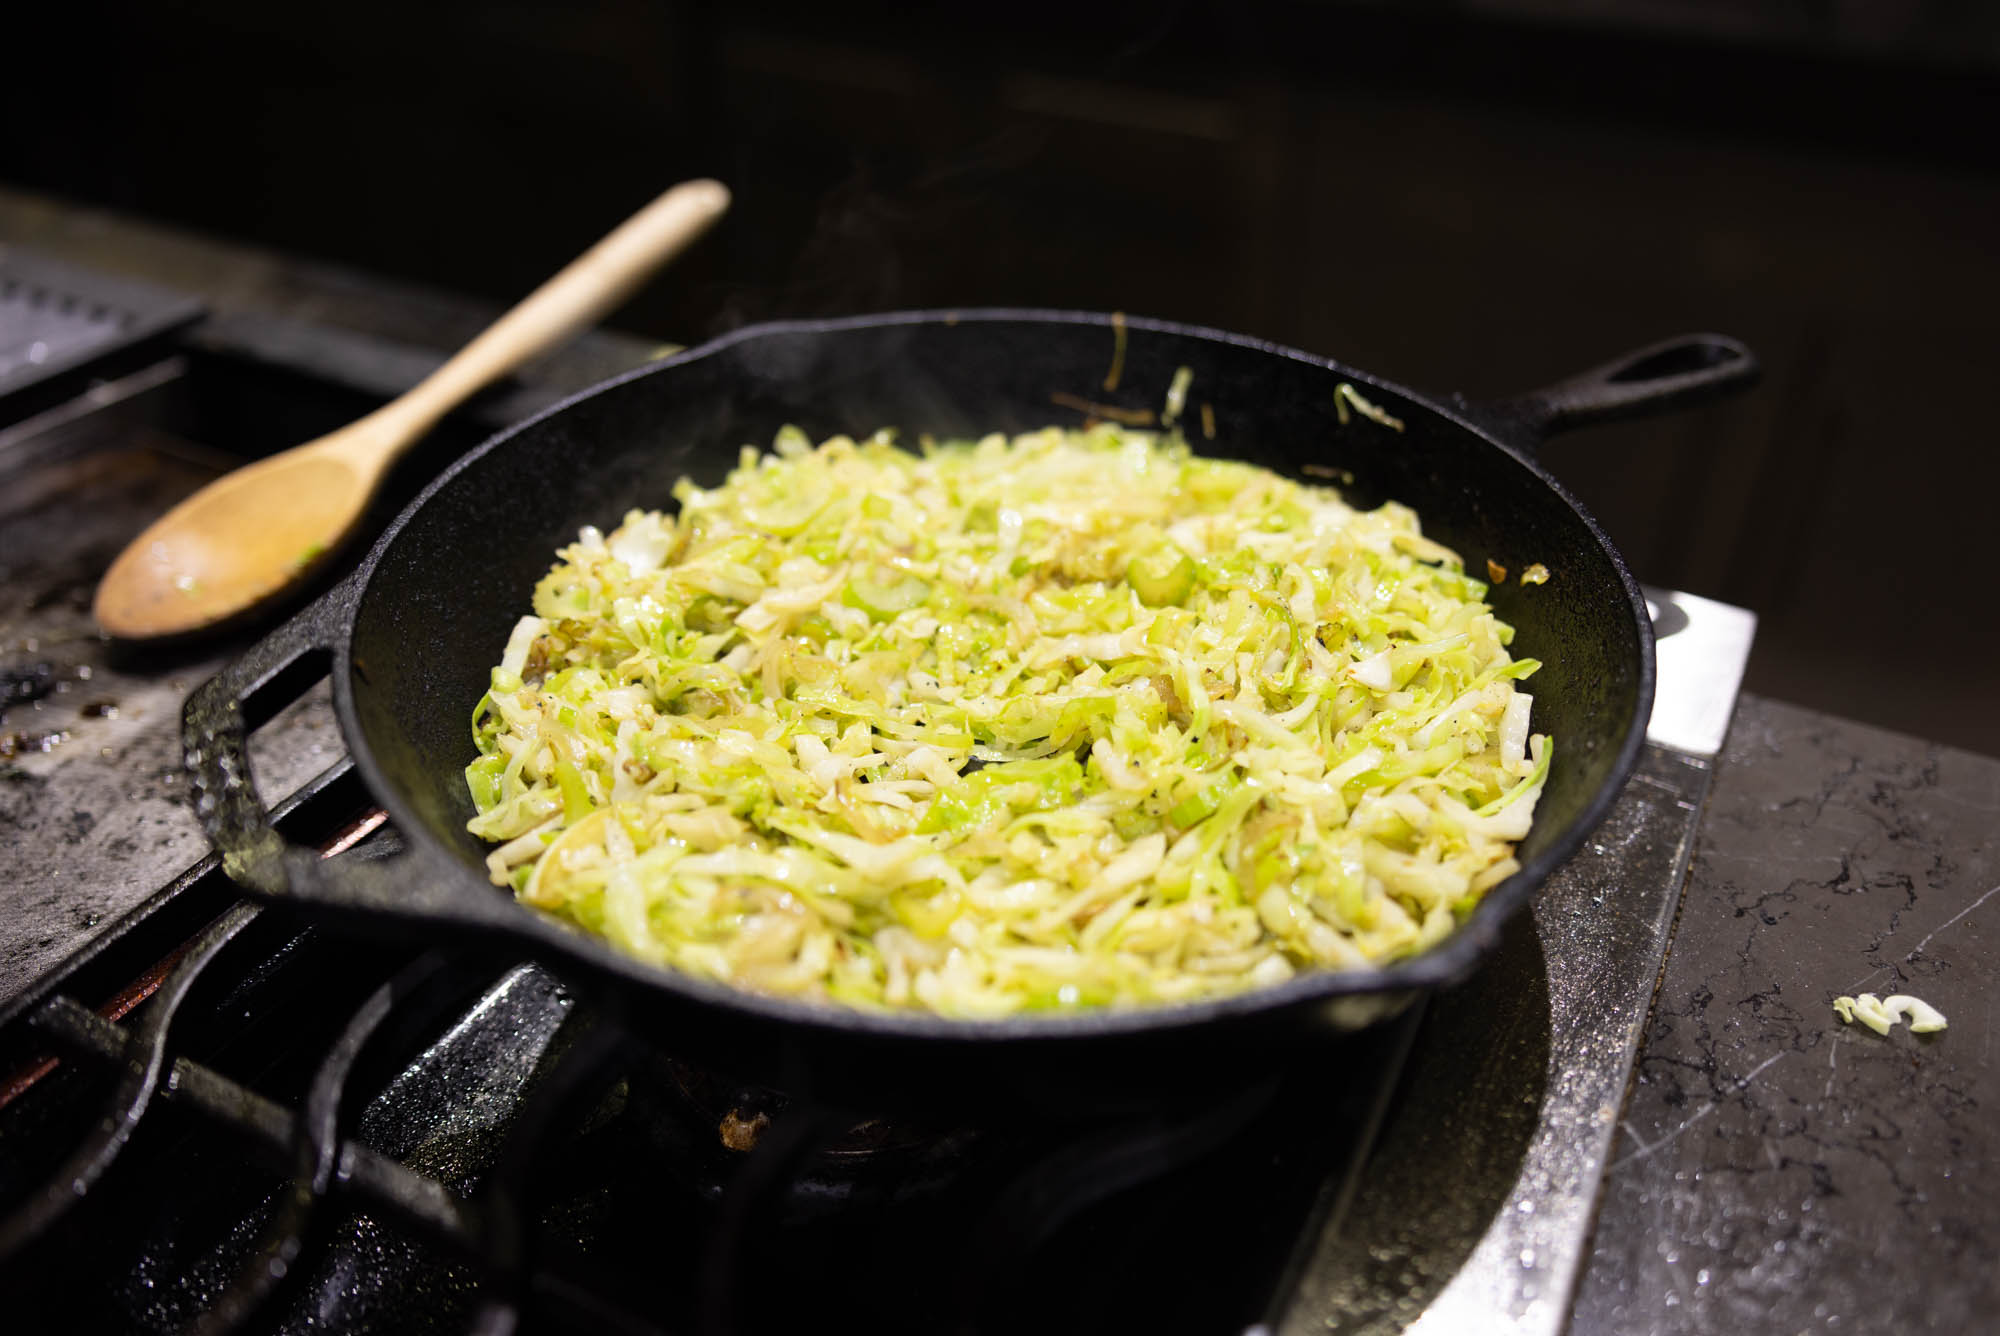 the stir-fried cabbage